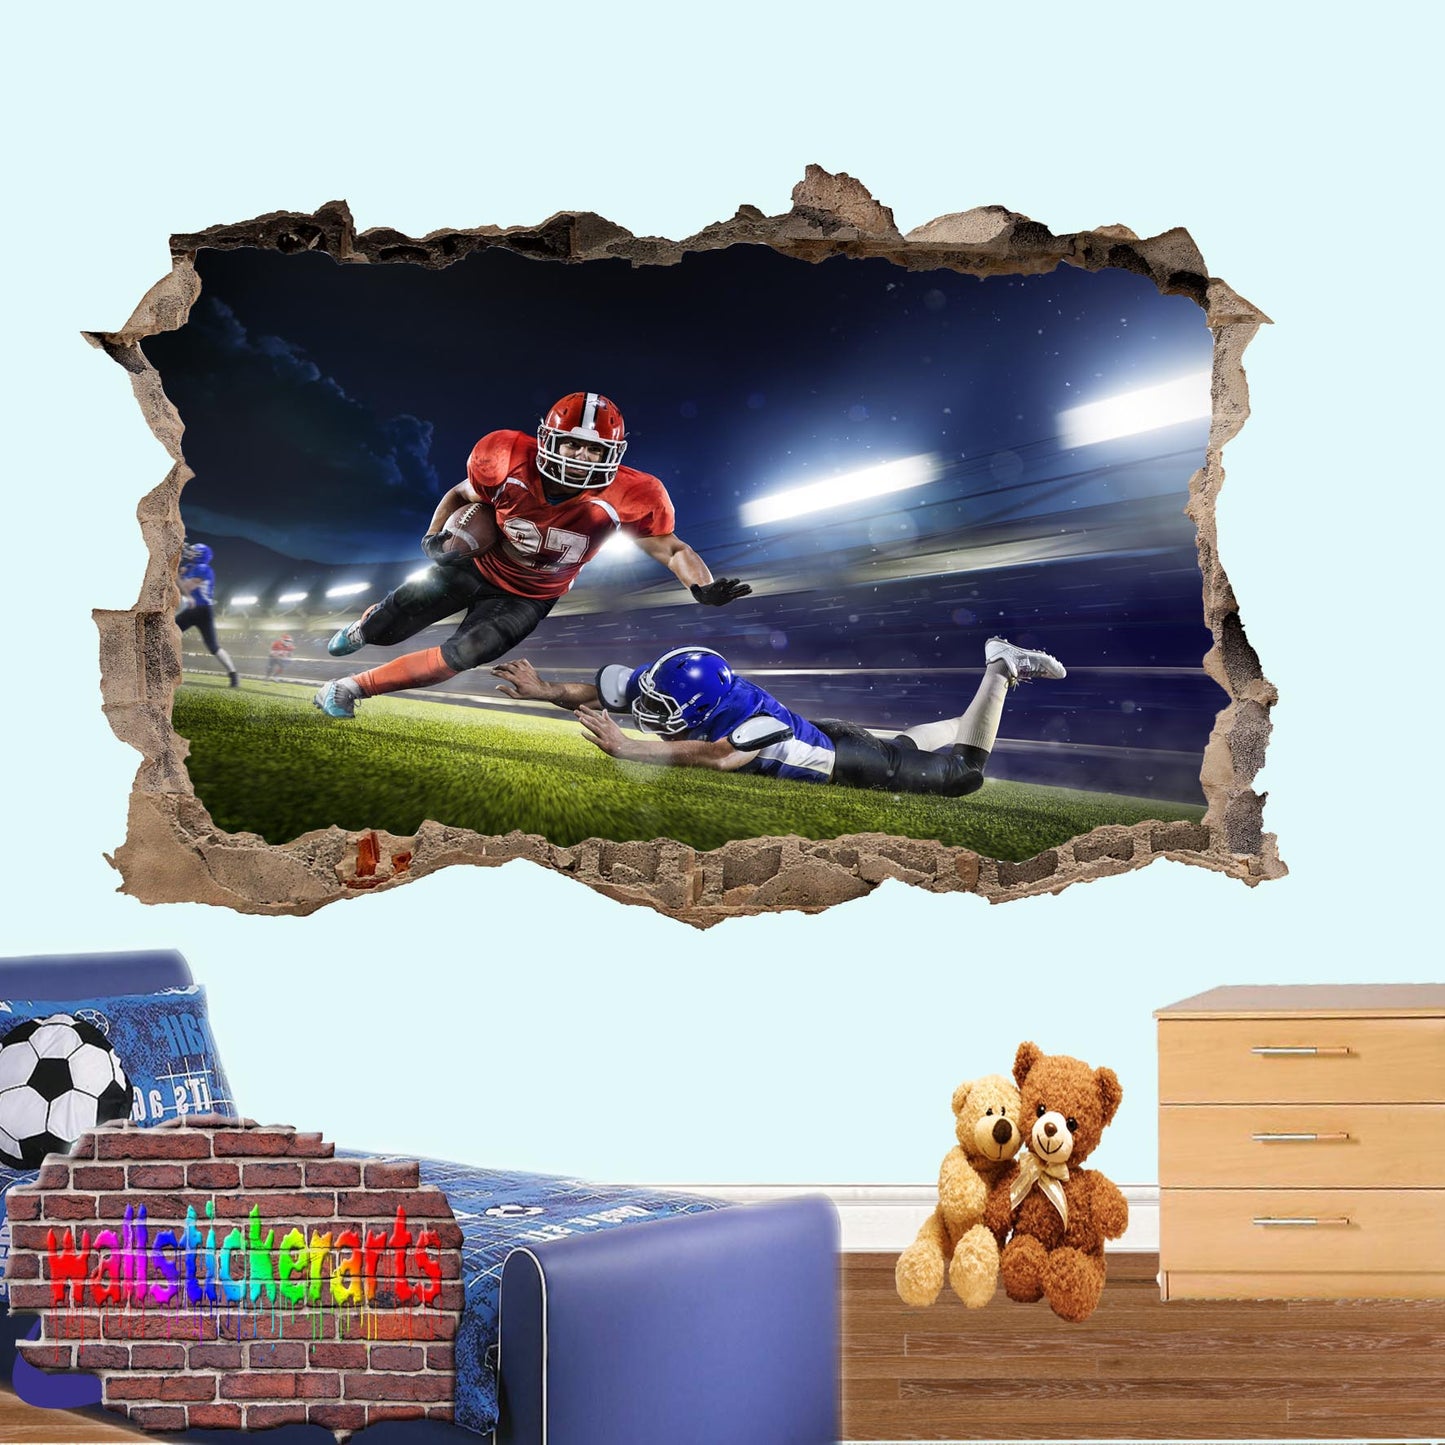 American Football Players Players On Pitch Sports 3d Smashed Effect Wall Sticker Room Office Nursery Shop Decoration Decal Mural YQ6